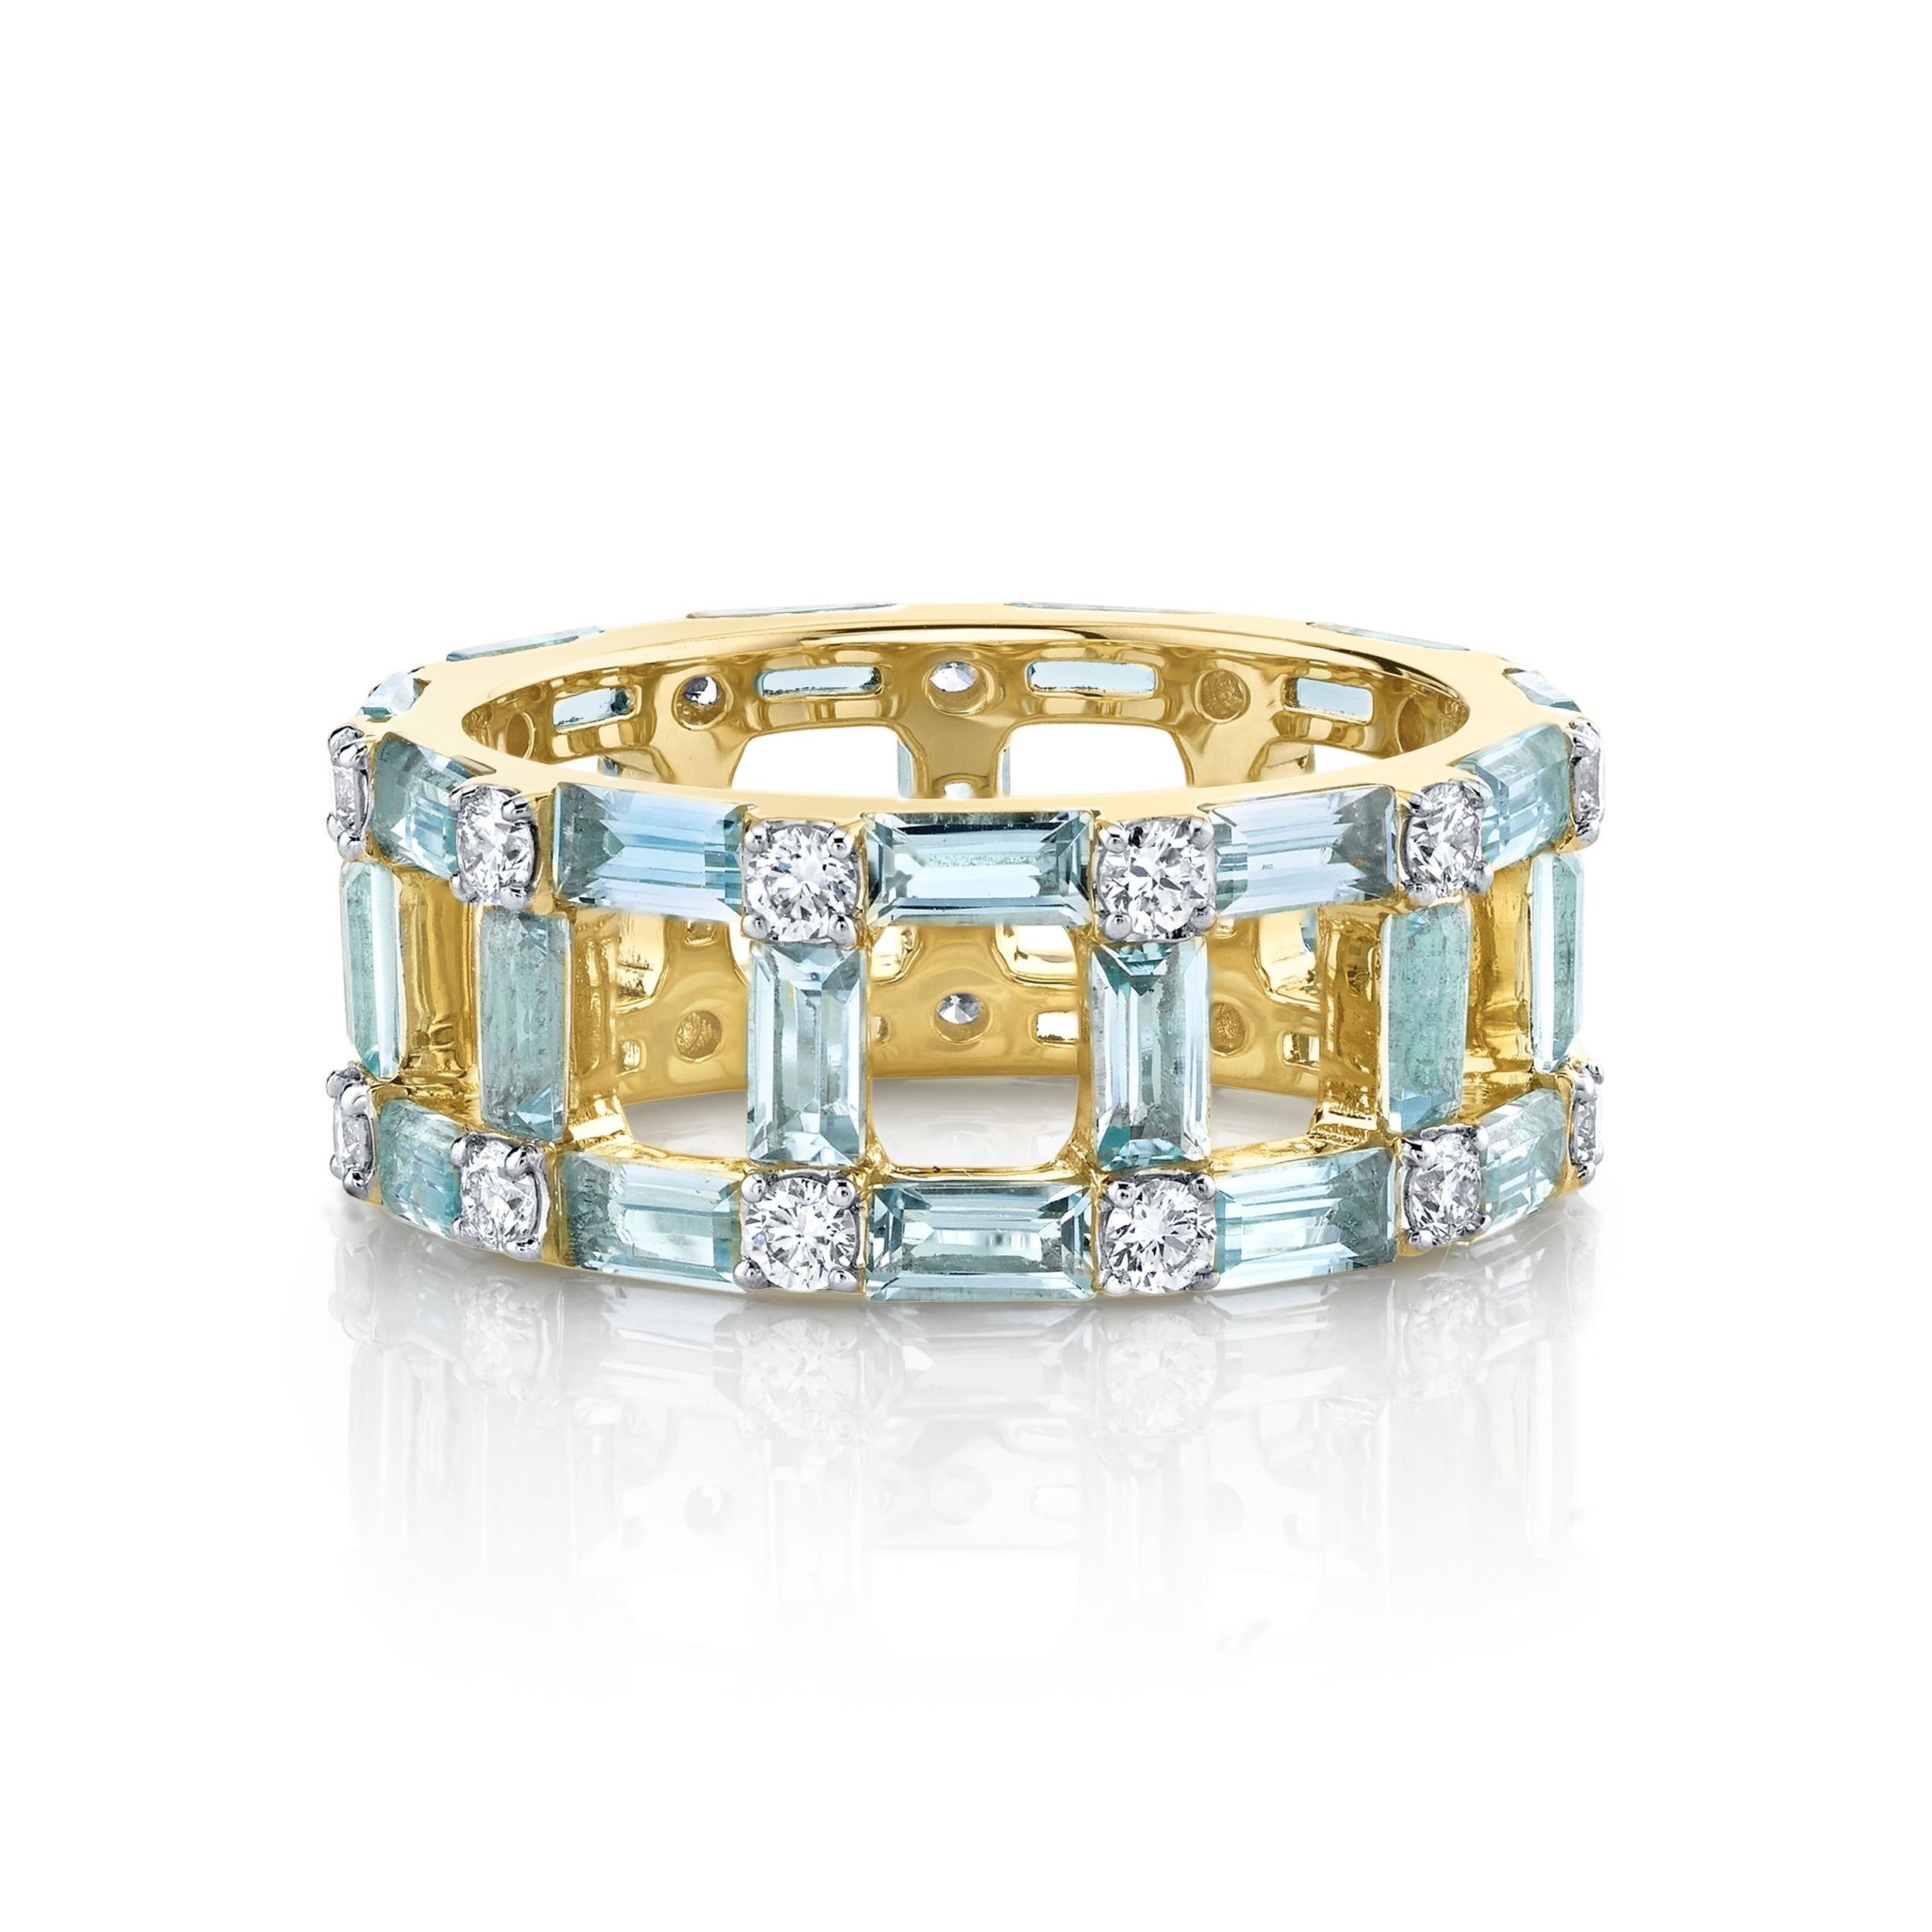 T SWISS BLUE TOPAZ BAGUETTE BAND WITH WHITE DIAMOND DETAIL